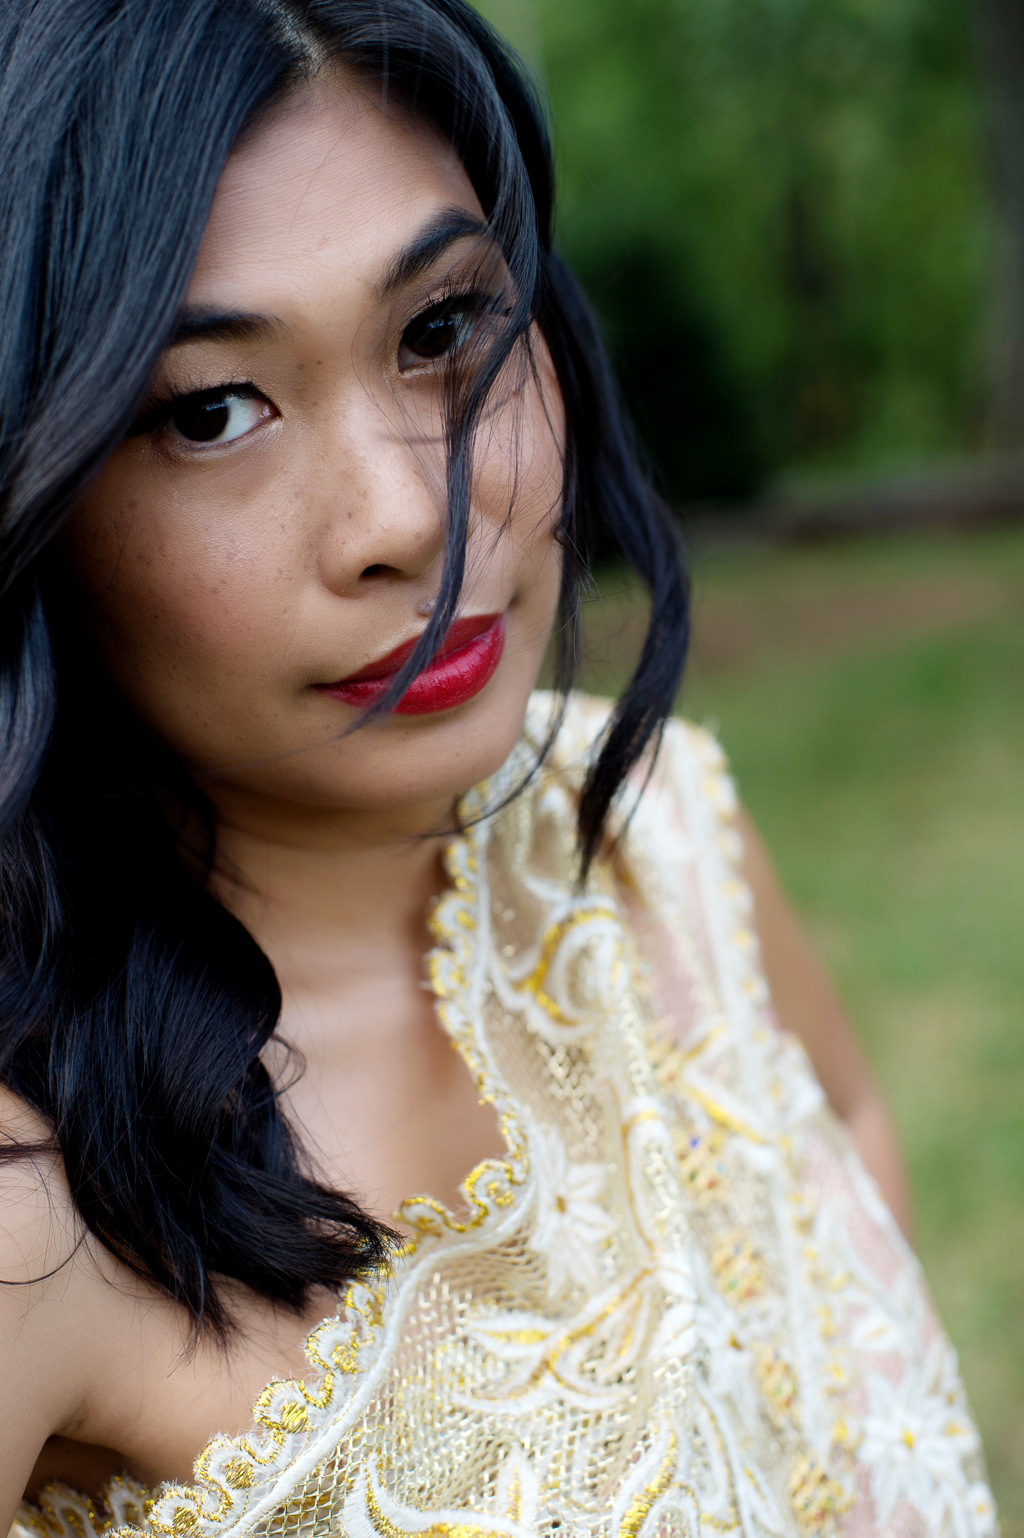 a woman in traditional gold cambodian wedding attire and red lipstick looks intently at the camera